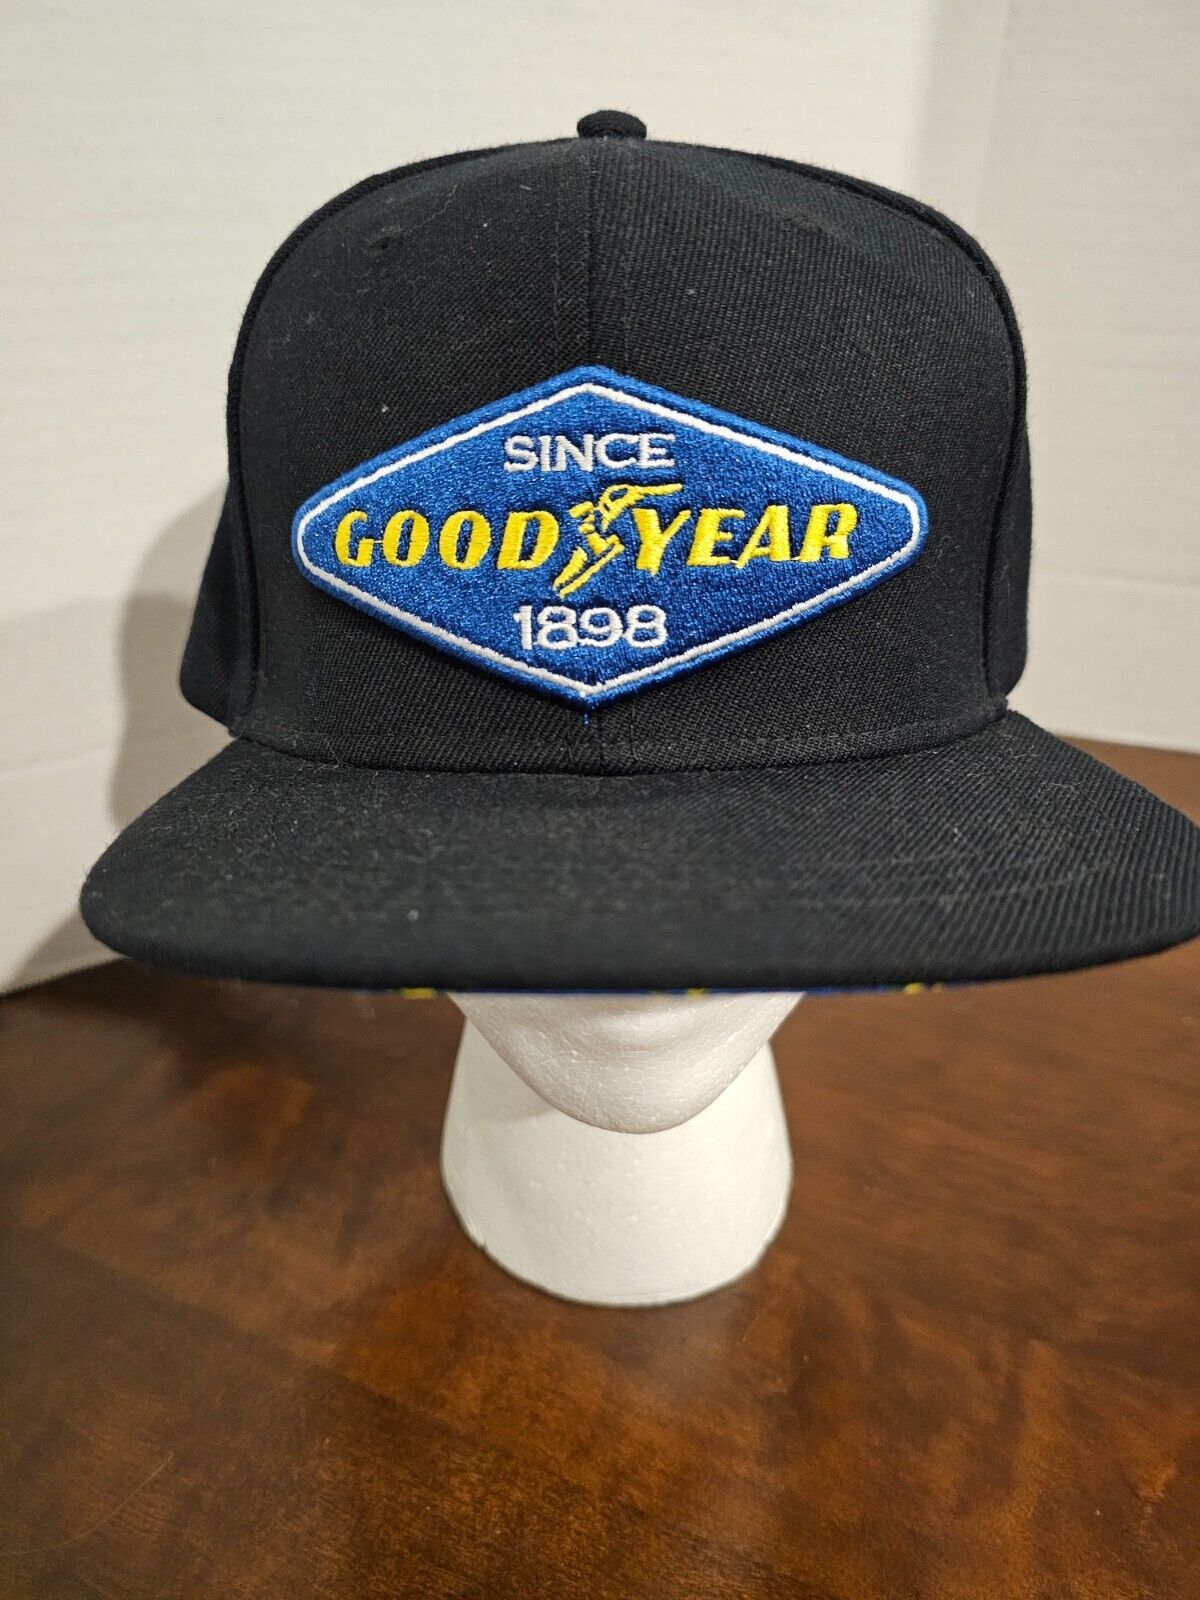 Primary image for Goodyear Tires Snapback  - Since 1898 - OSFM